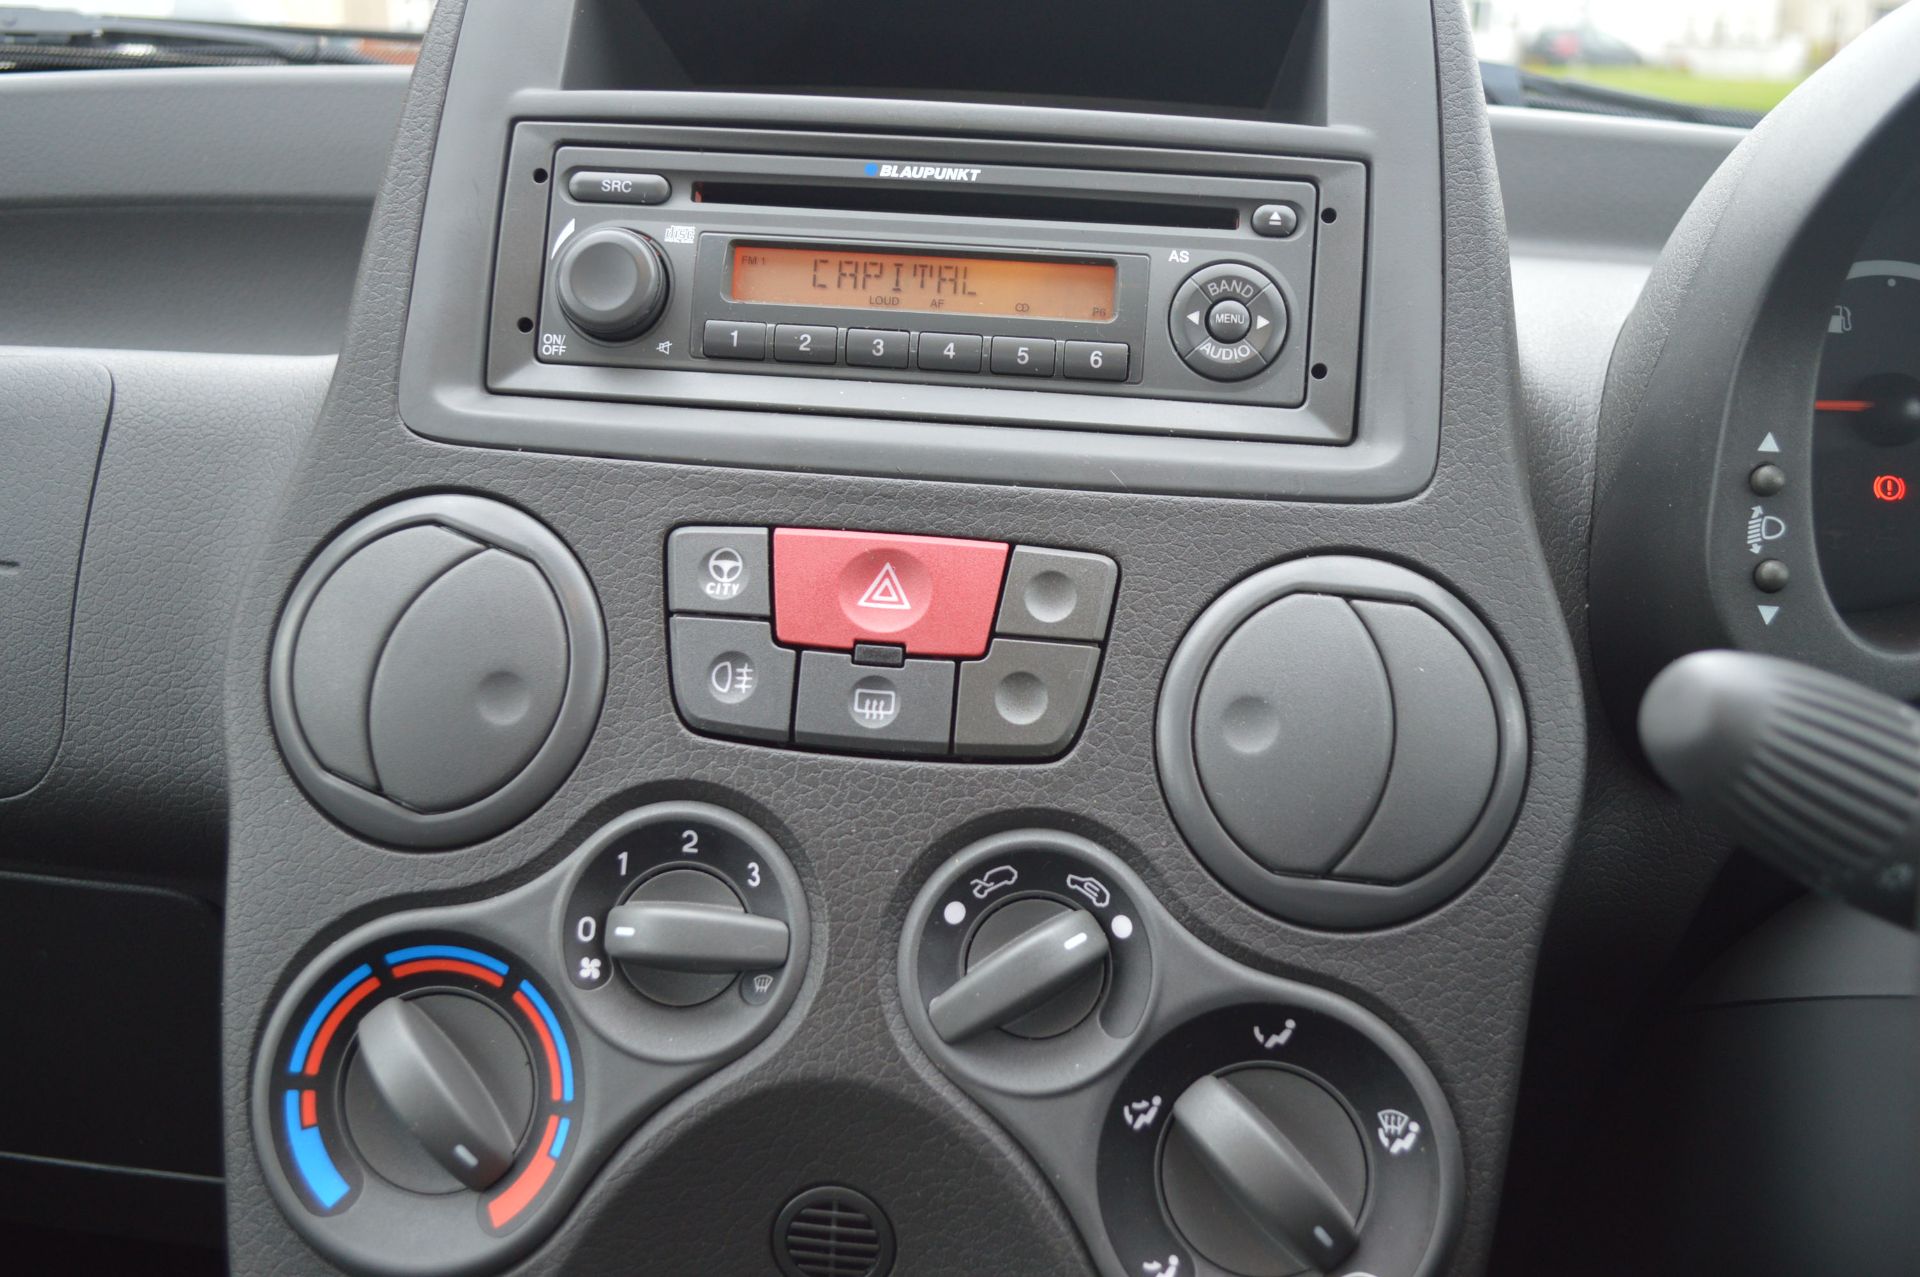 2010/59 REG FIAT PANDA ACTIVE ECO, SHOWING 1 OWNER FROM NEW - DRIVES GREAT - Image 23 of 25